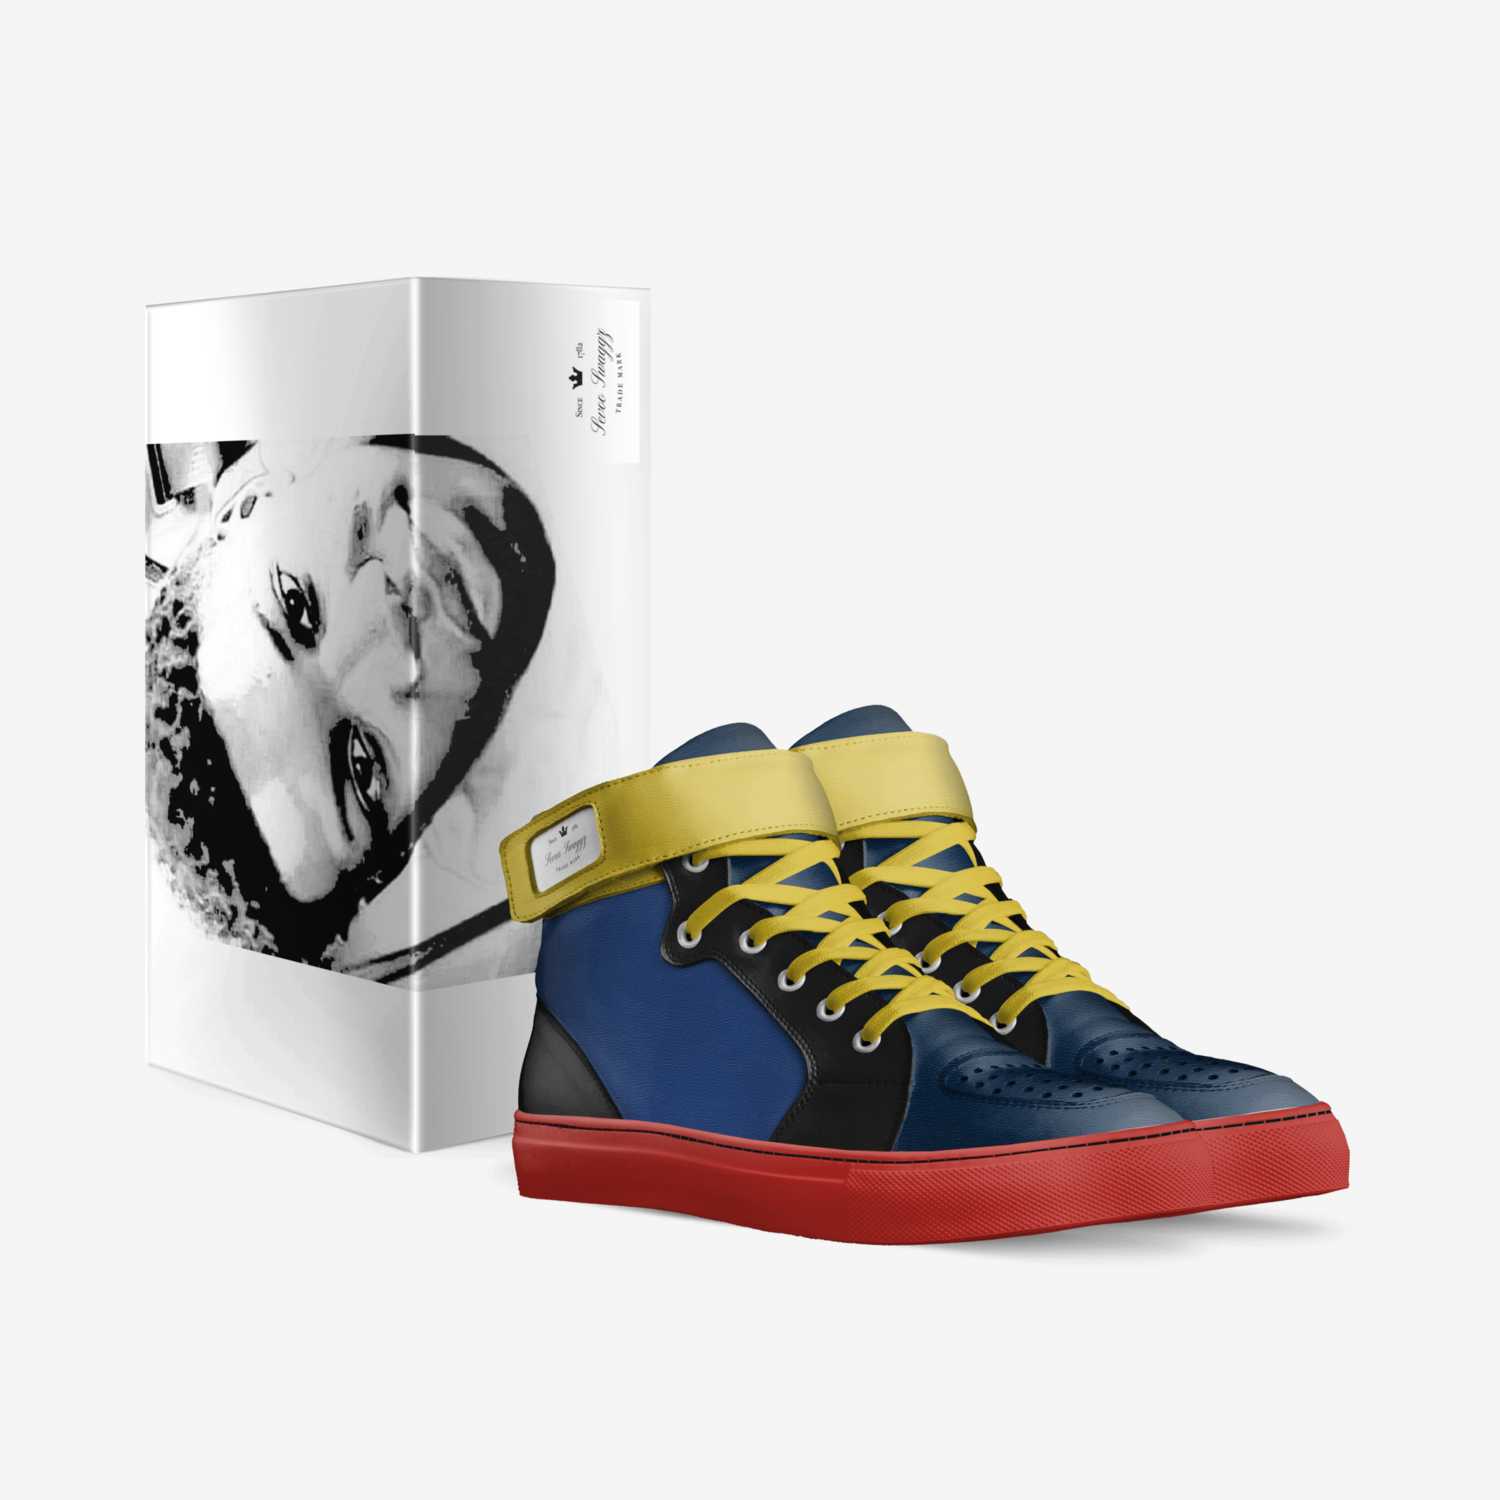 Sevoo Swaggz custom made in Italy shoes by Chantell Smith | Box view